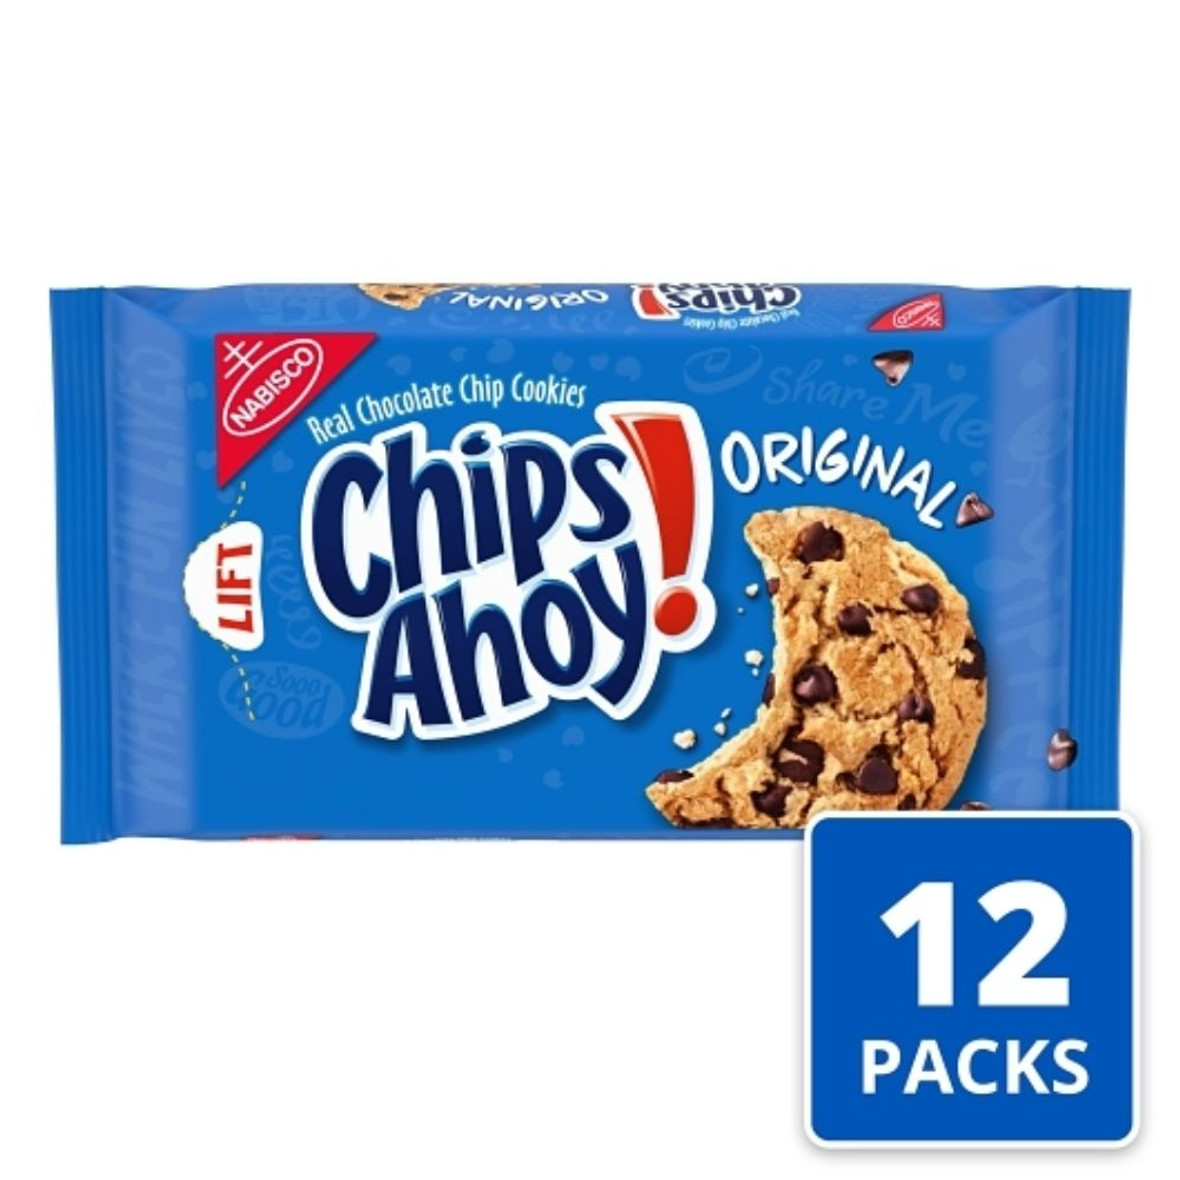 Chips Ahoy Original Chocolate Chip Cookies